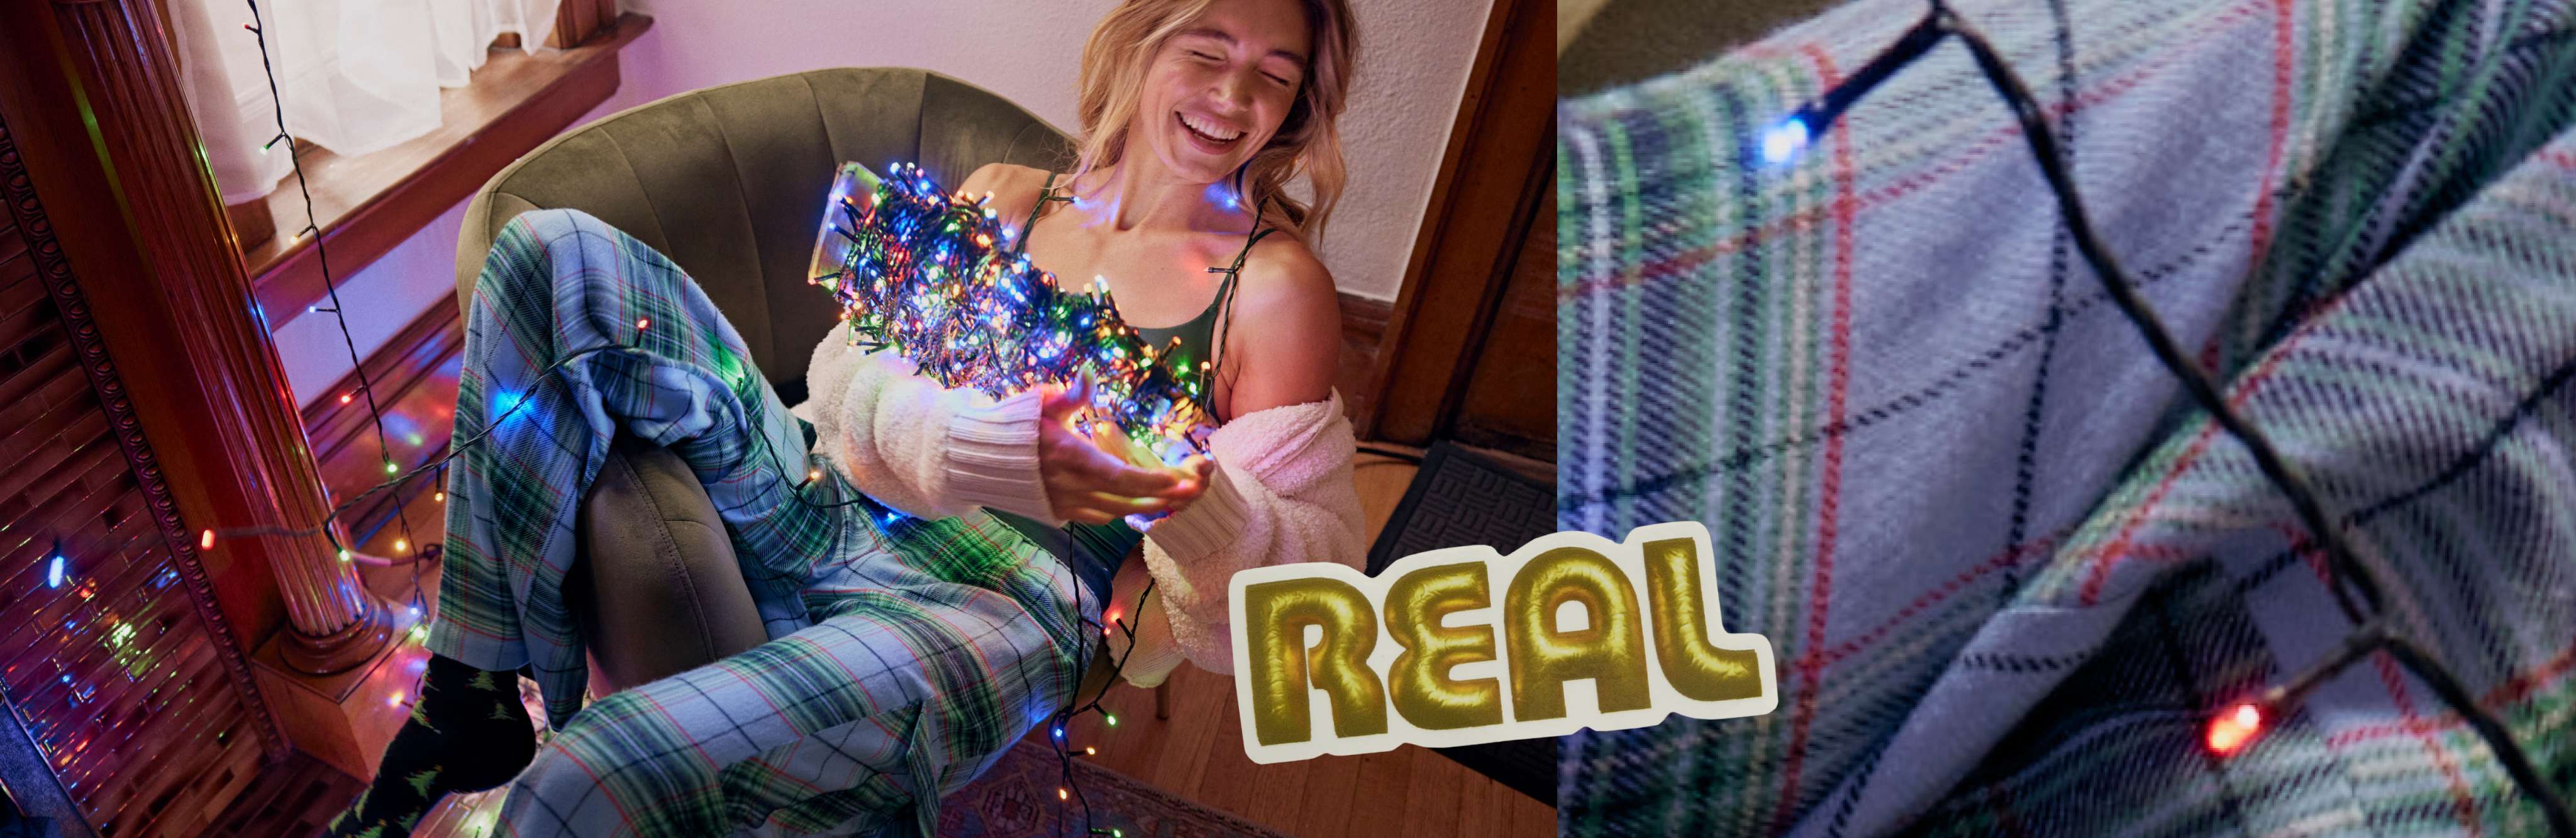 model in pajamas with christmas lights